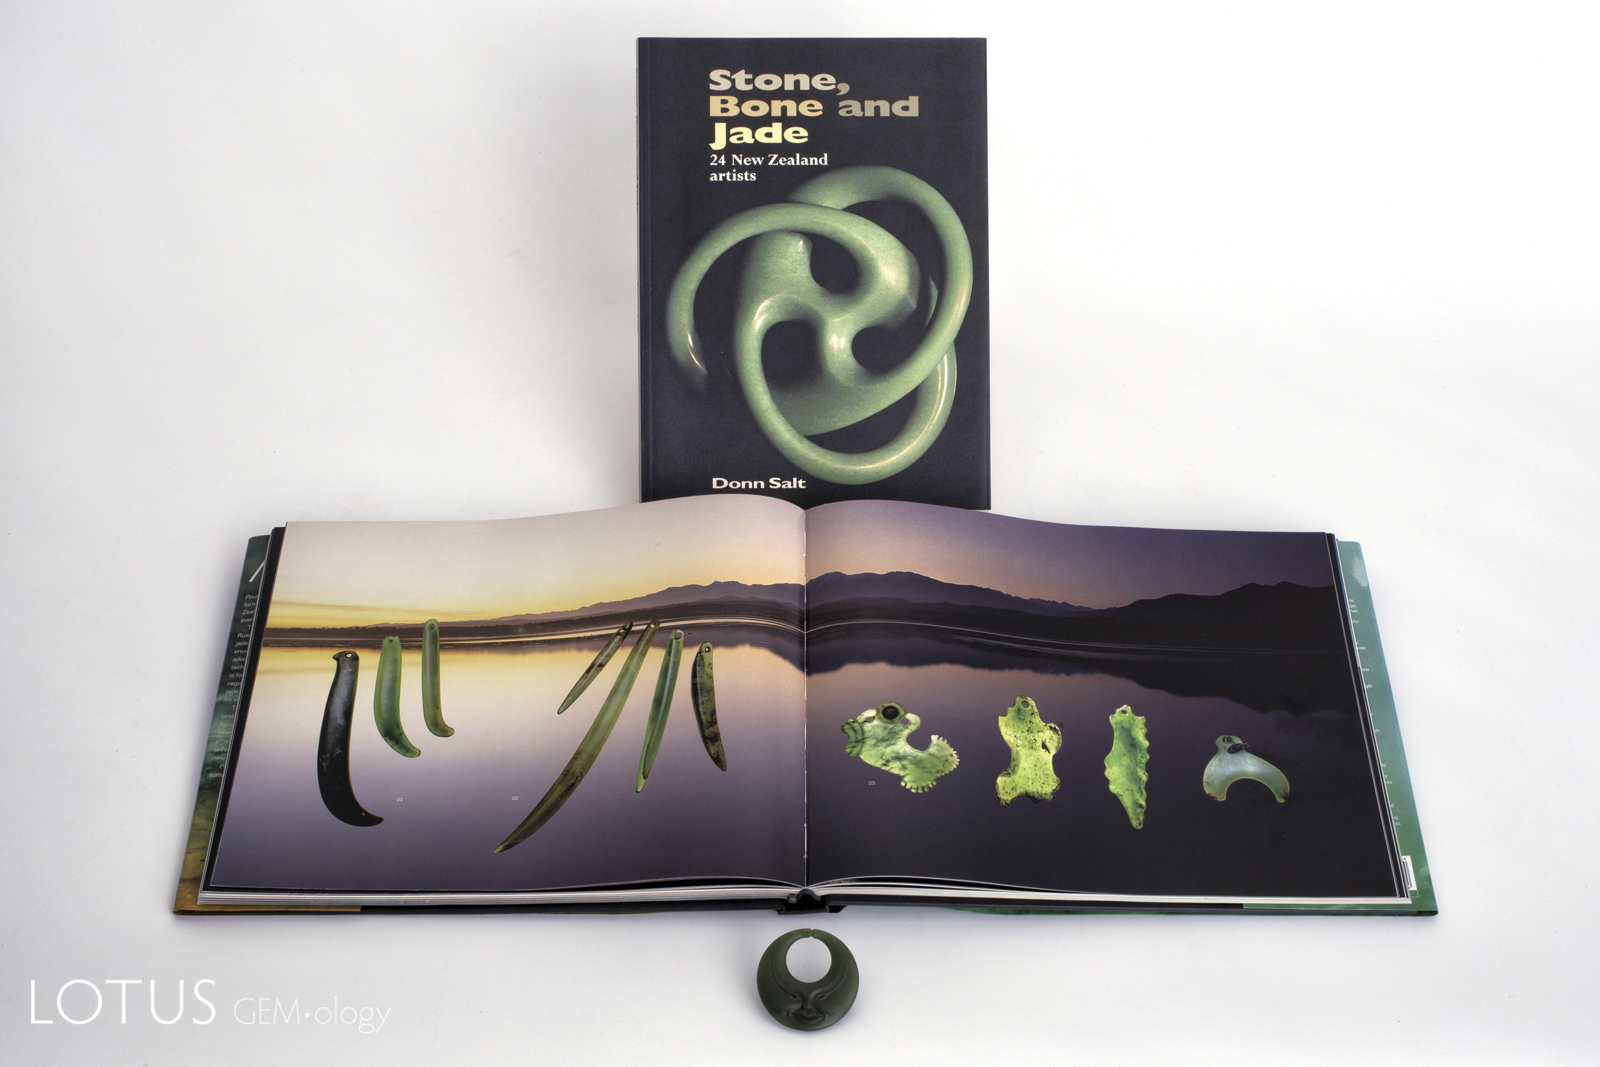 Master carver Donn Salt's book on New Zealand carving sits above a spread from Beck and Mason's lavish 2010 Pounamu: The Jade of New Zealand. In the foreground is an original Donn Salt carving in New Zealand nephrite jade.